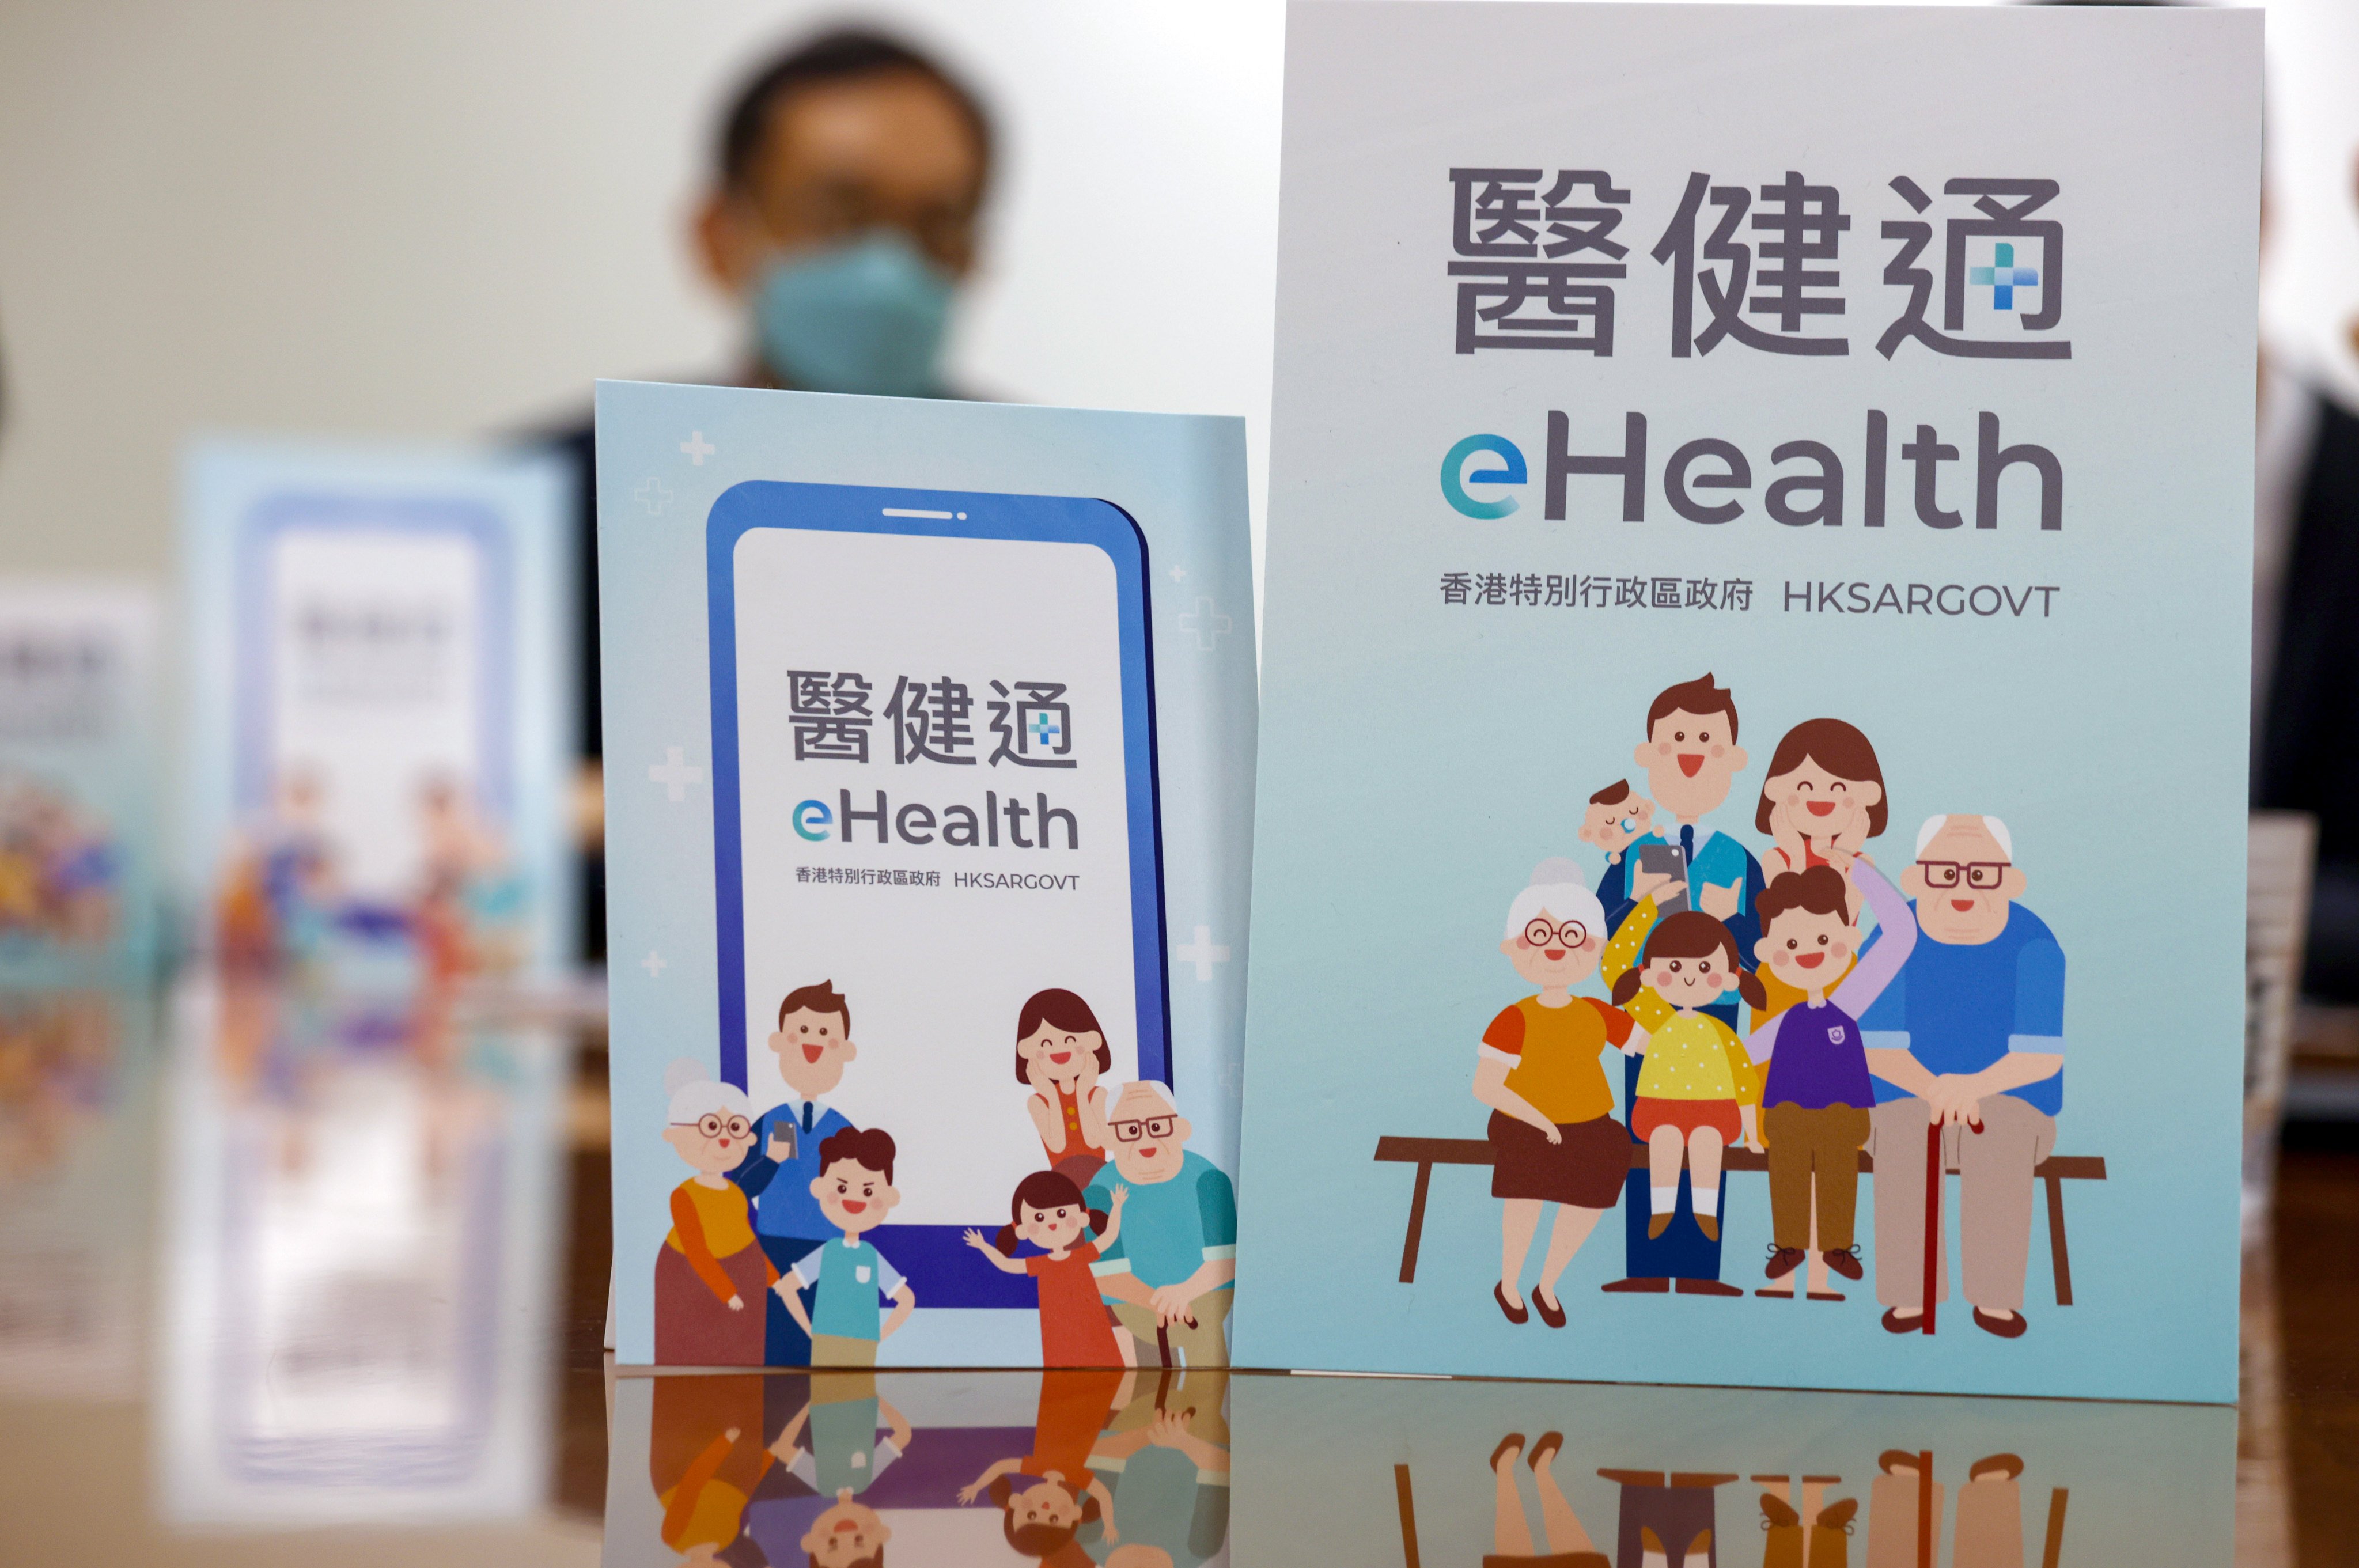 Placards promoting Hong Kong’s “eHealth” system, which will be upgraded at a cost of HK$1.4 billion. Photo: Yik Yeung-man